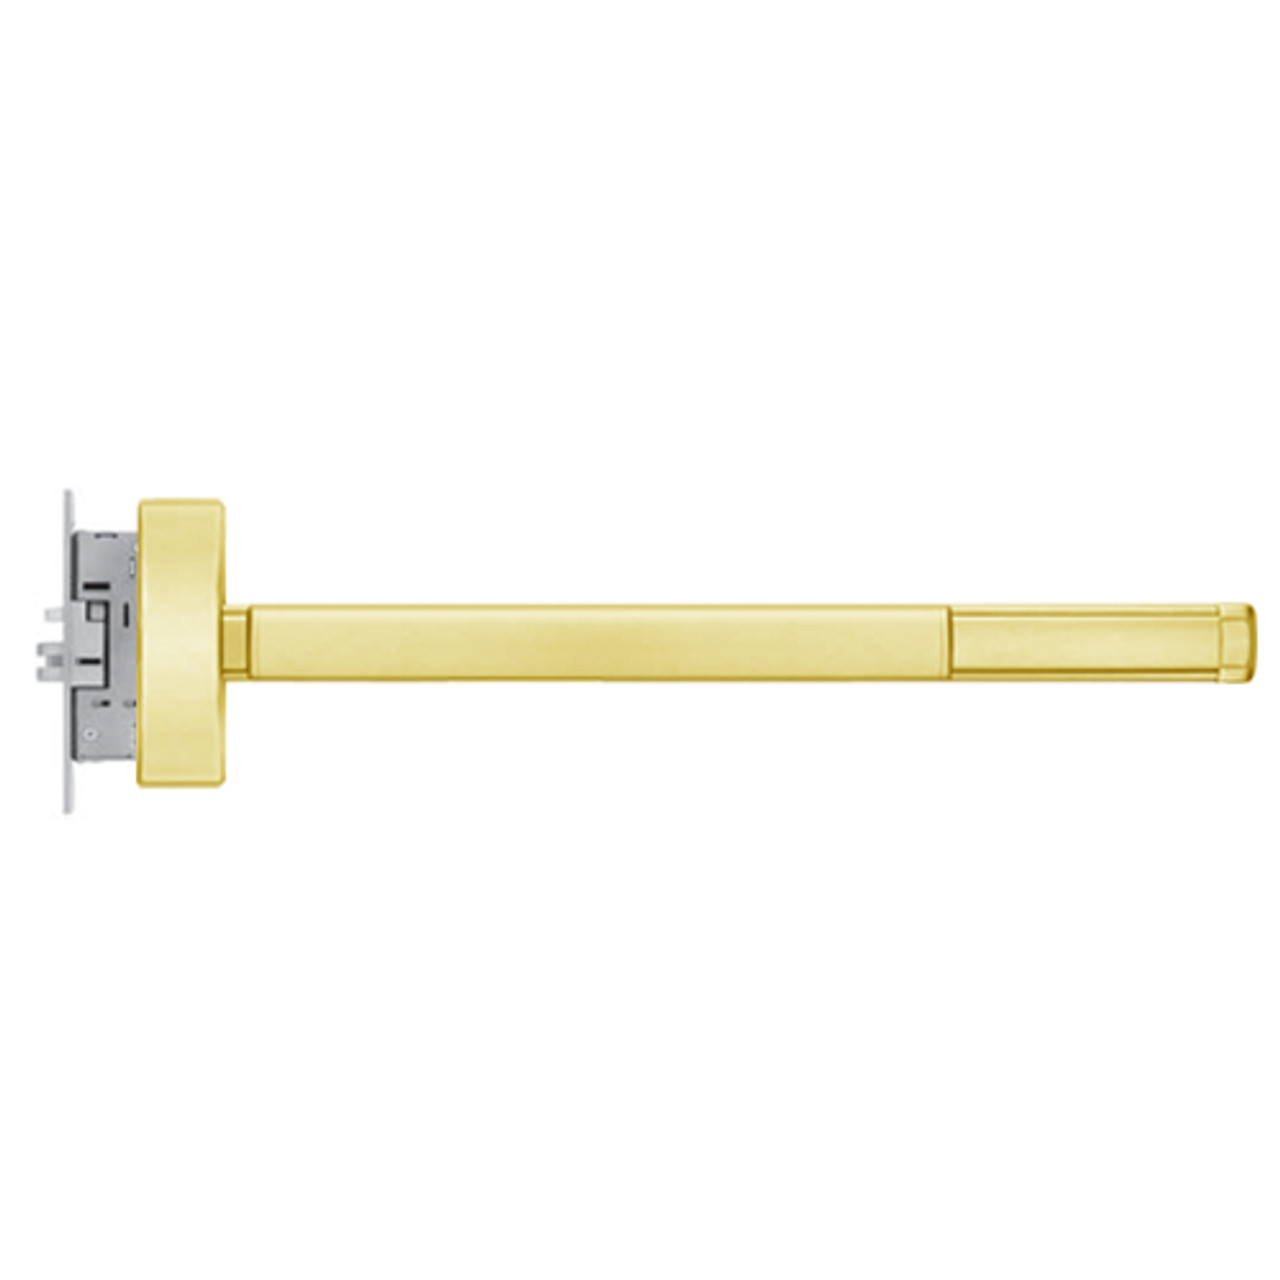 TS2308-RHR-605-36 PHI 2300 Series Apex Mortise Exit Device with Touchbar Monitoring Switch Prepped for Key Controls Lever/Knob in Bright Brass Finish